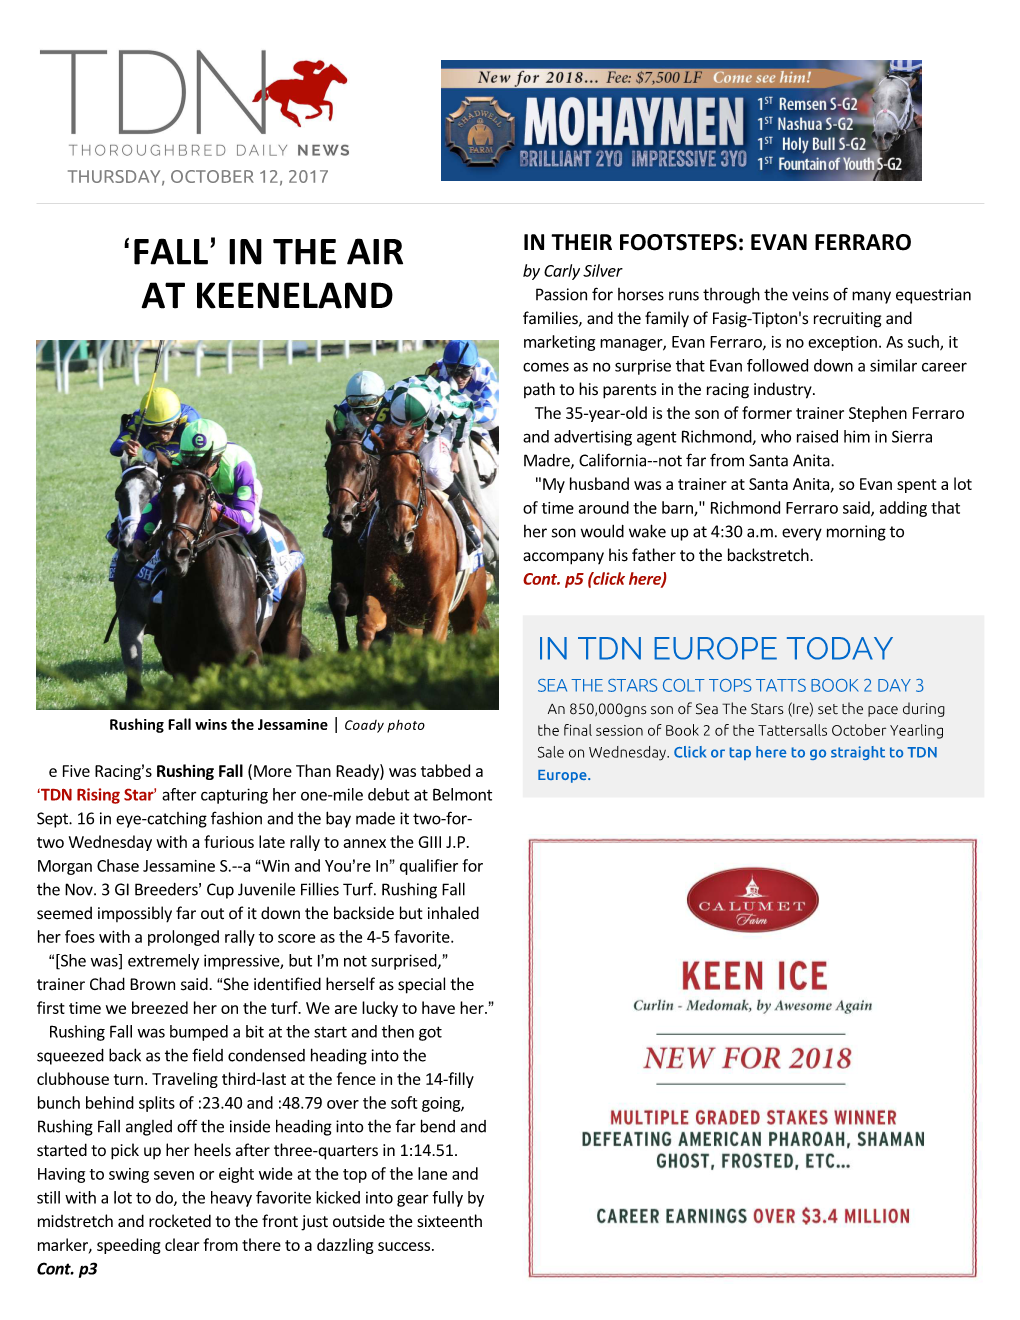 Fall= in the Air at Keeneland